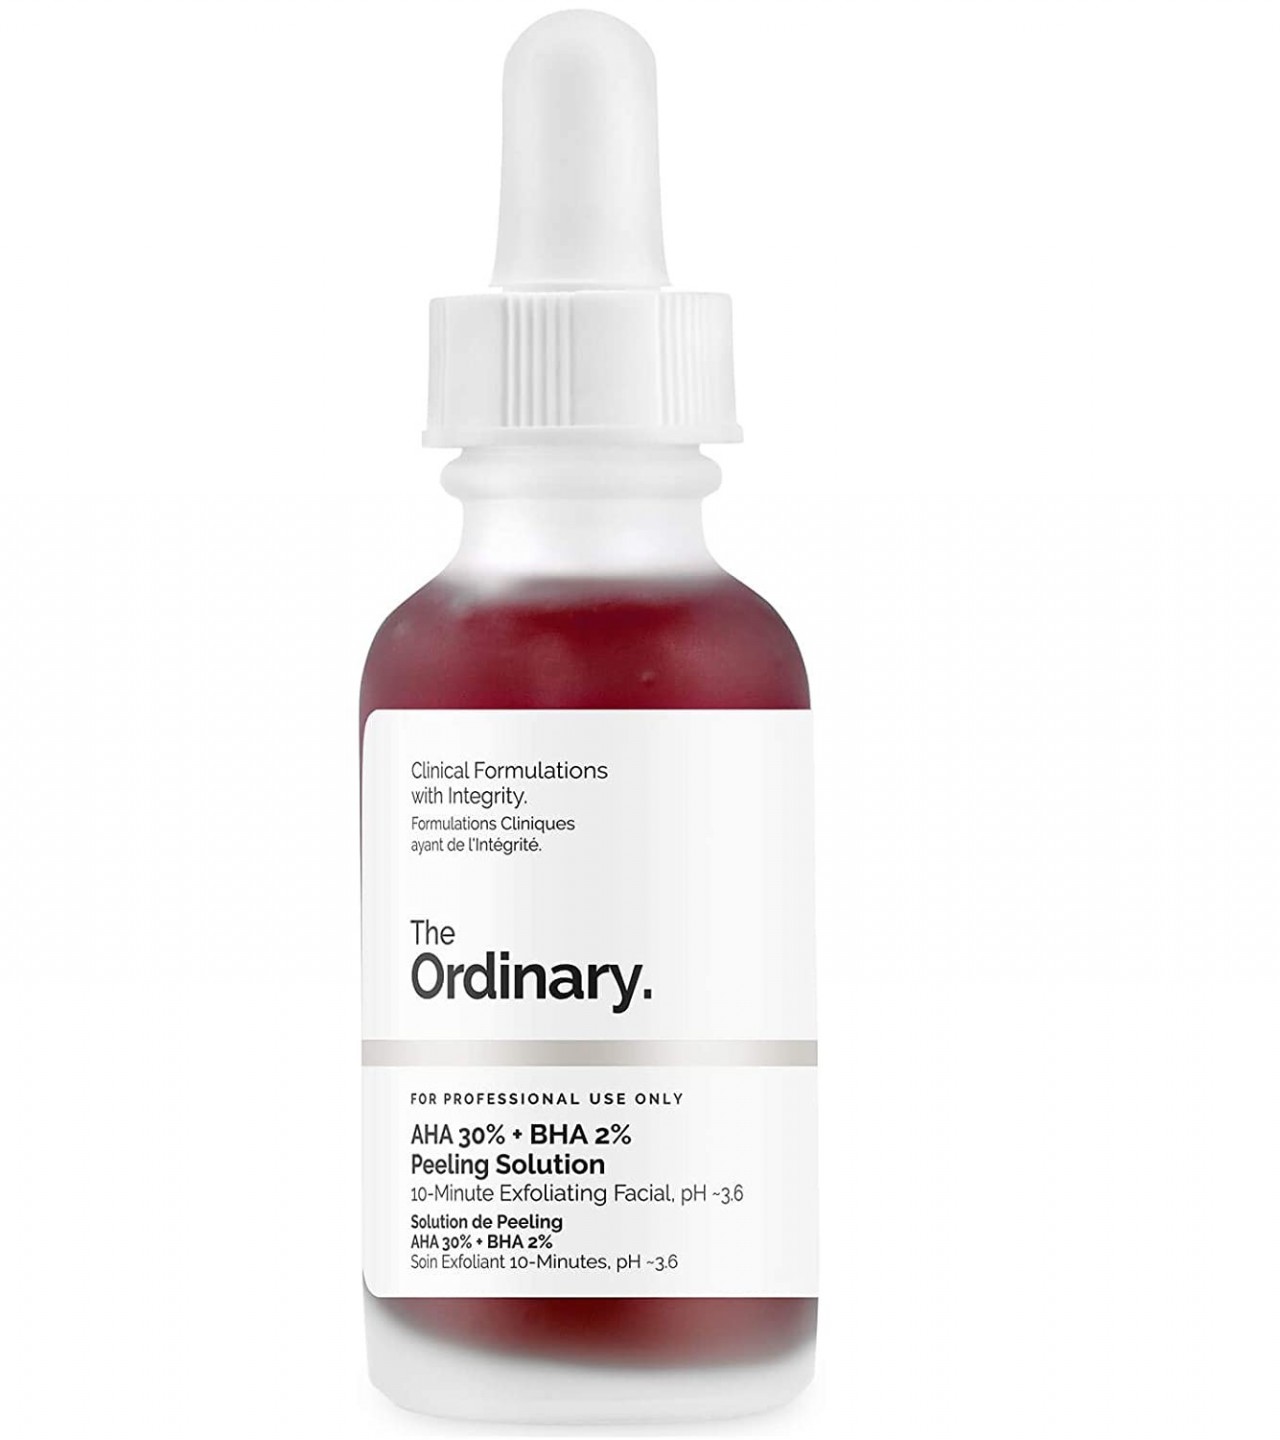 The Ordinary 5% Caffenie + EGCG Eye Serum Cream for Wrinkles Dark Circle Puffines - Red